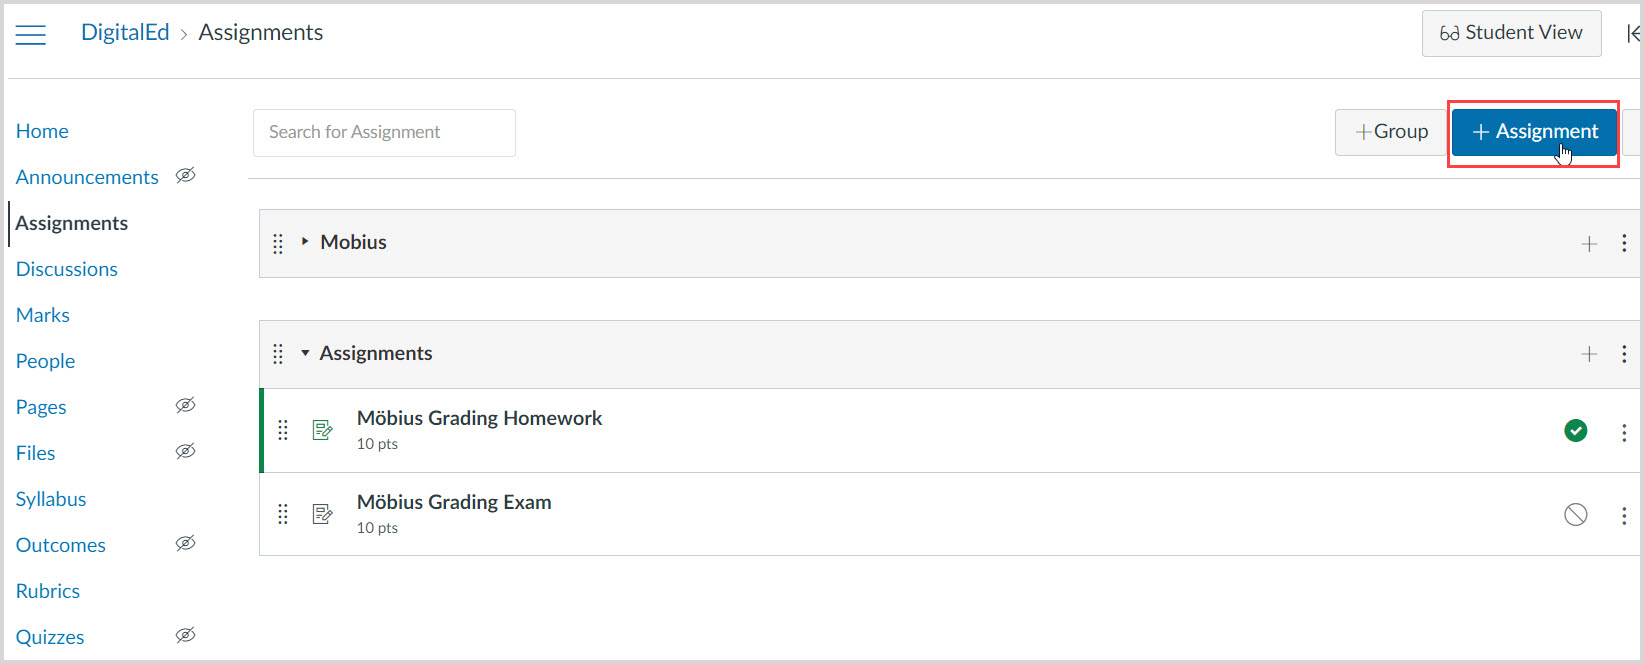 On Canvas course assignments page, at the top-right the Add Assignment button is highlighted.